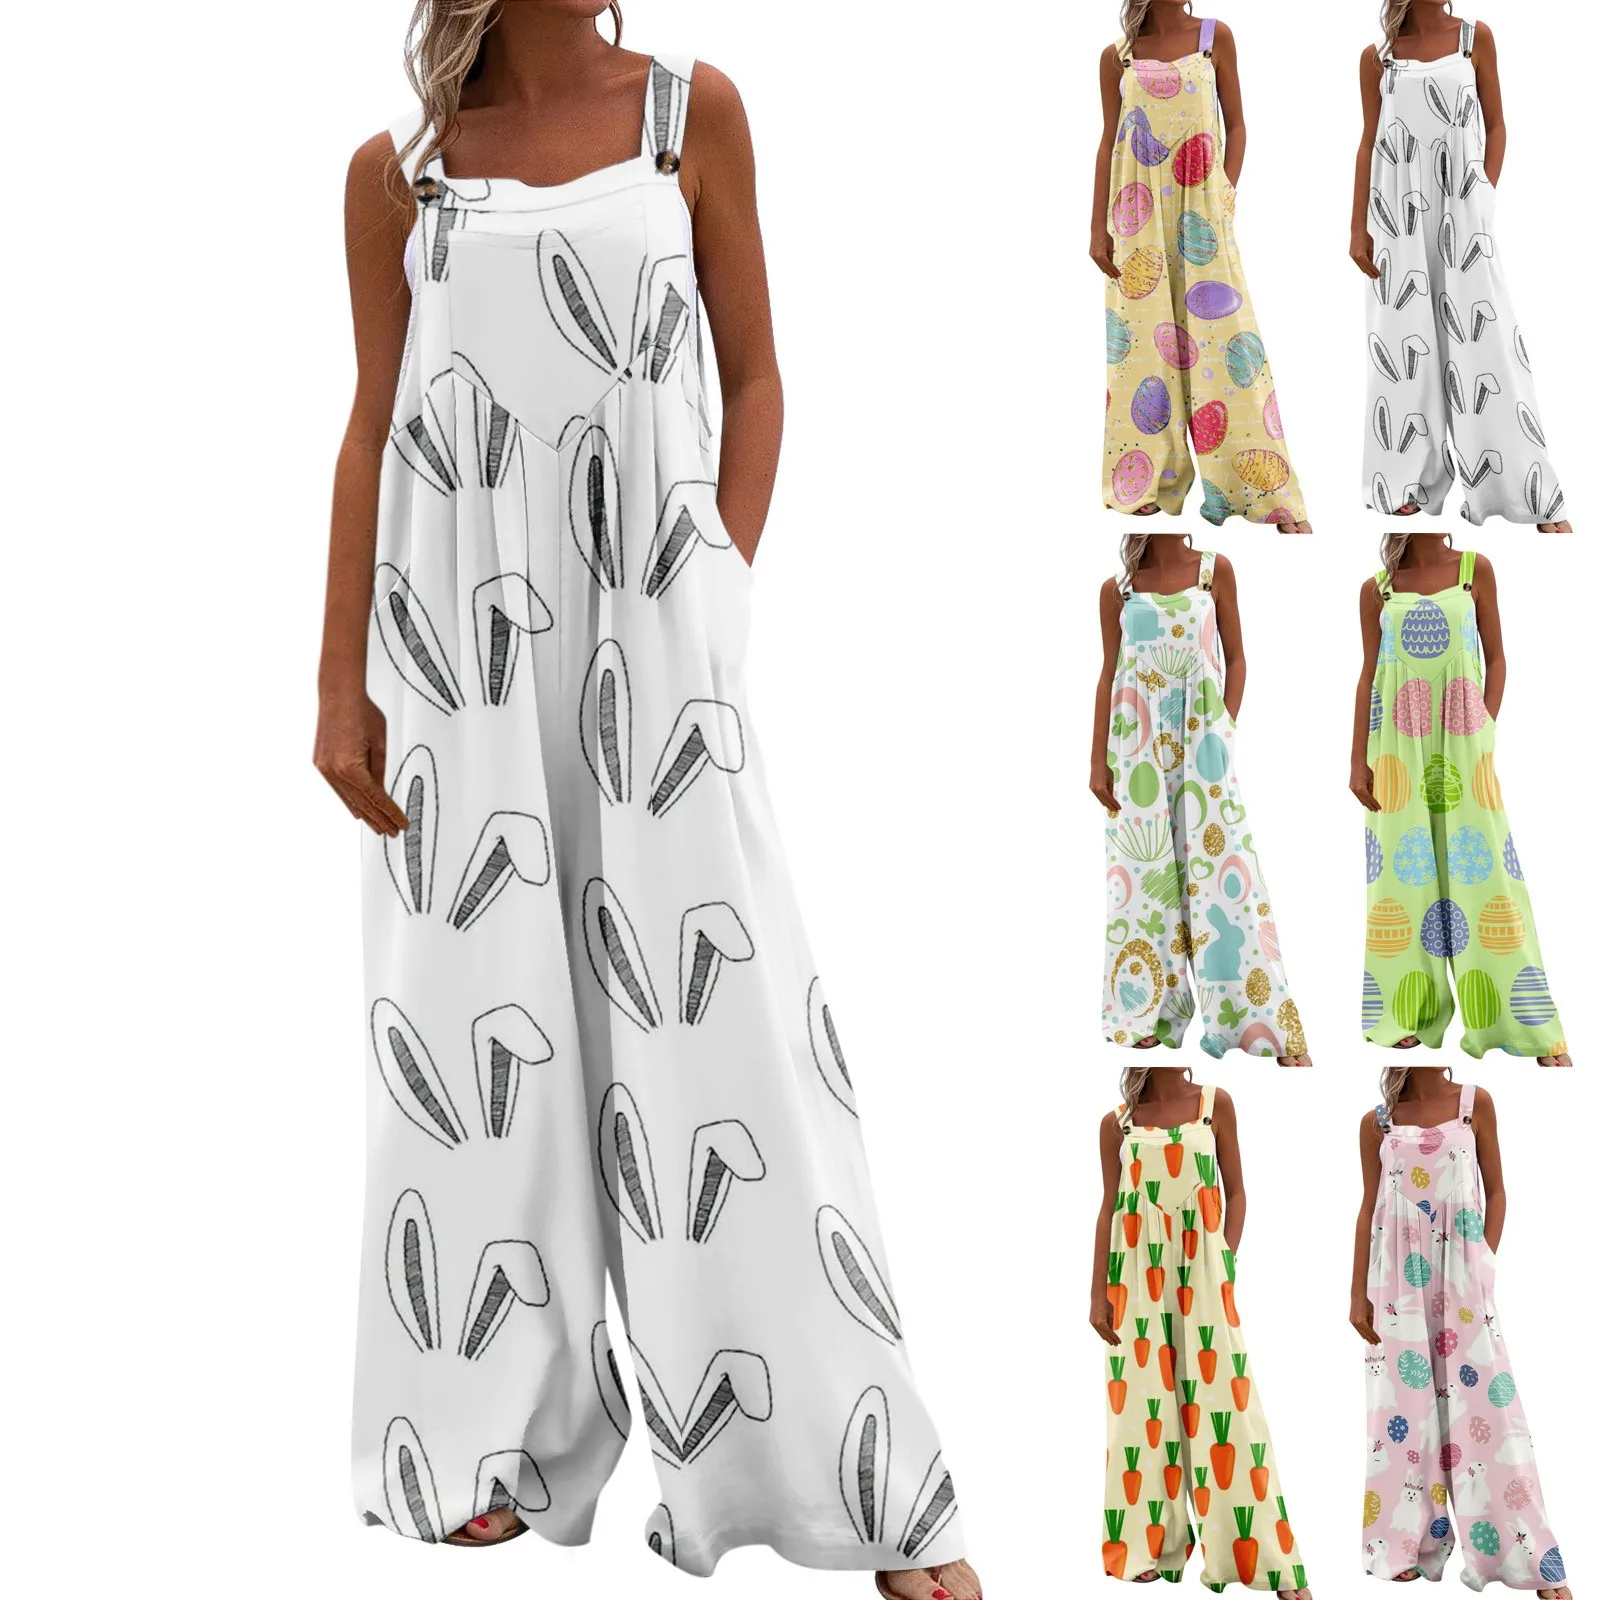 

Women's Overalls Casual Funny Printed Wide Leg Jumpsuits Bib Rompers Sleeveless Straps With Pockets Outfits فساتين طويلة